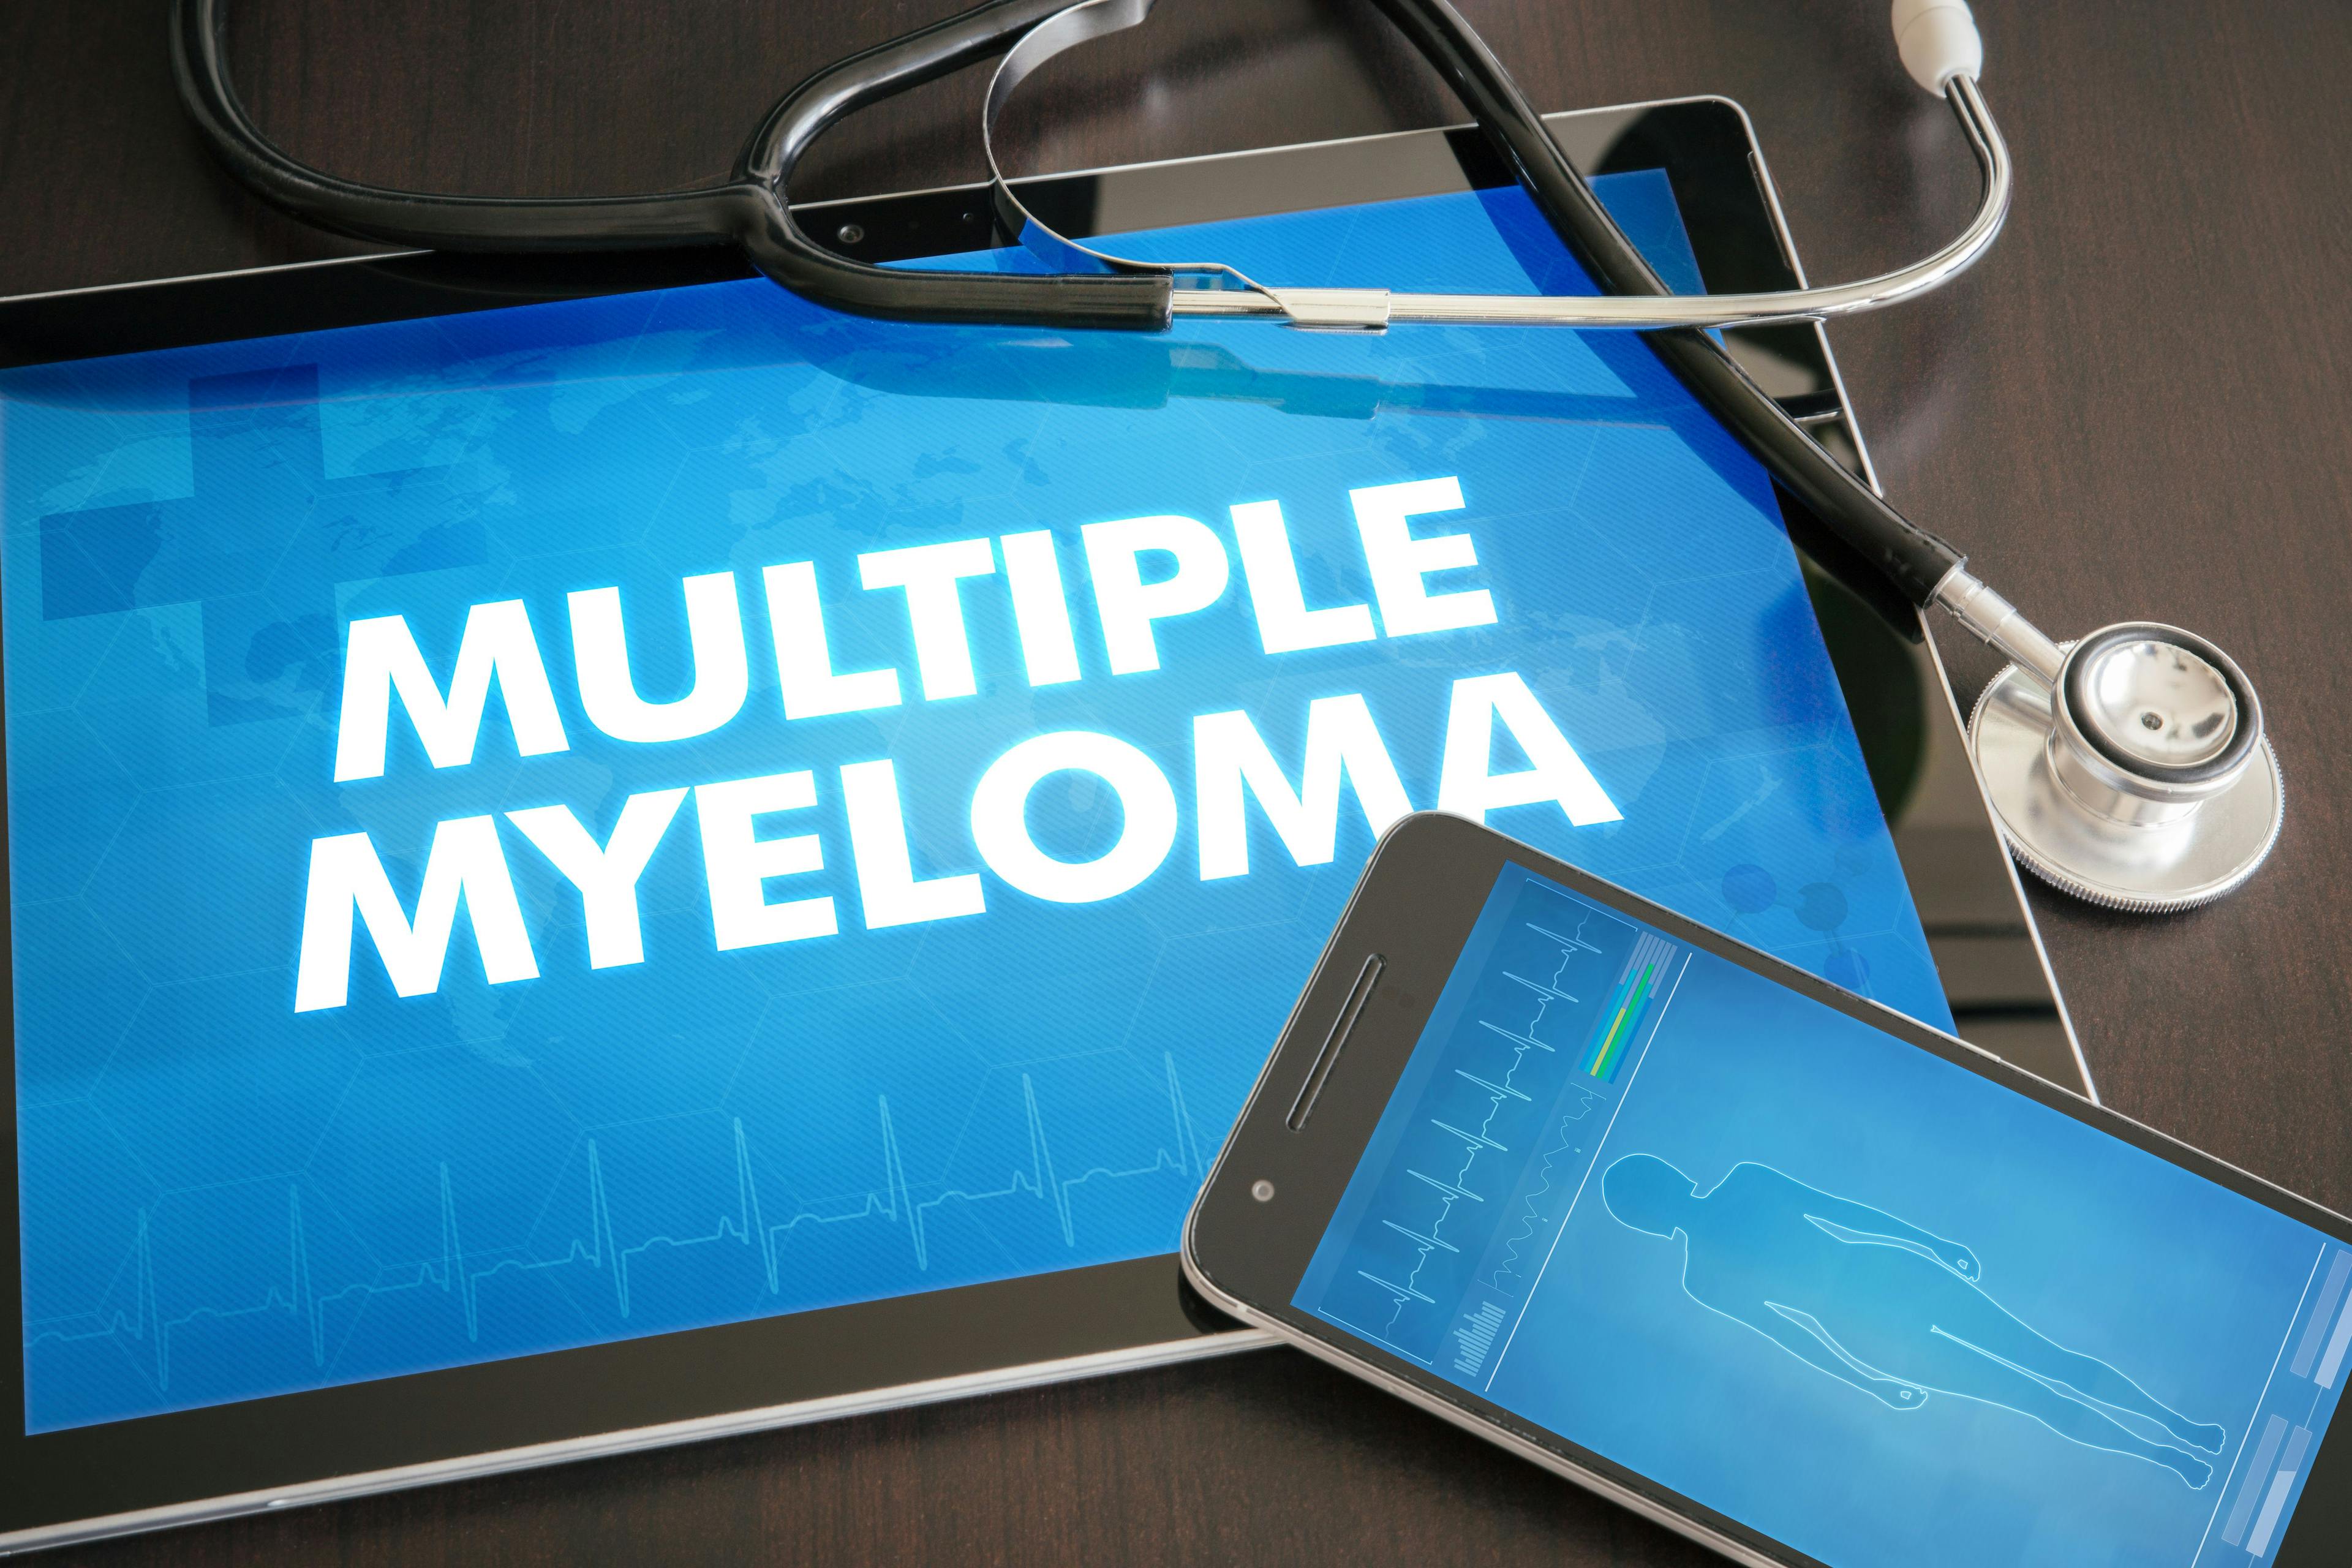 Multiple Myeloma on Tablet Screen | image credit: ibreakstock - stock.adobe.com